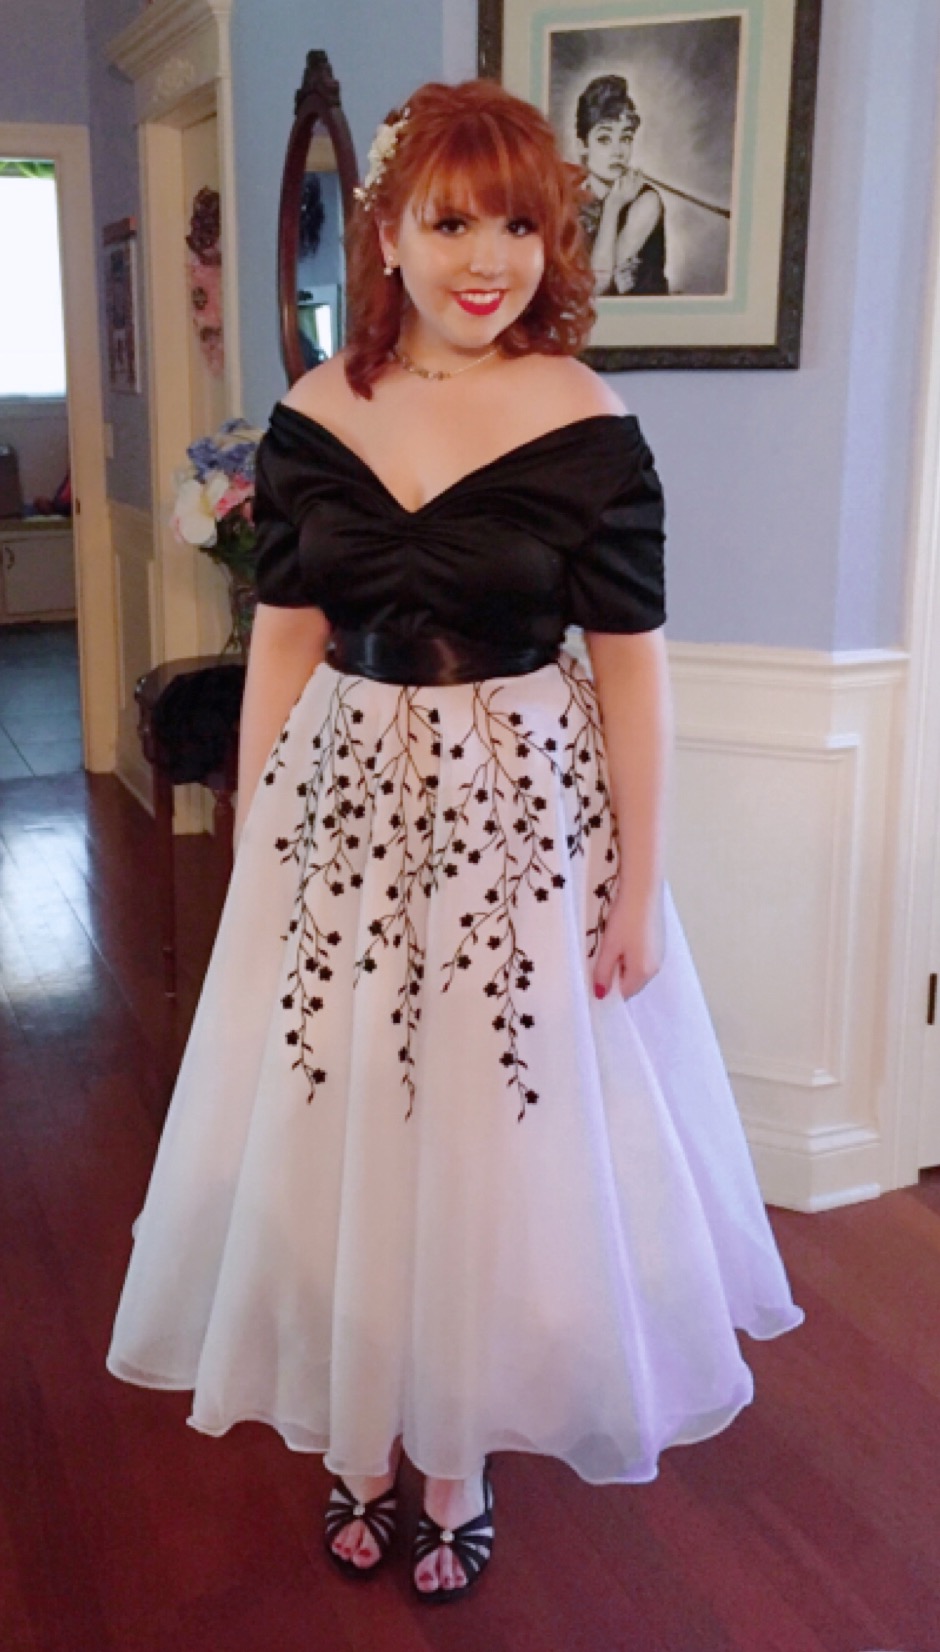 GRACE KELLY PROM DRESS INSPIRED - Sewing Projects ...